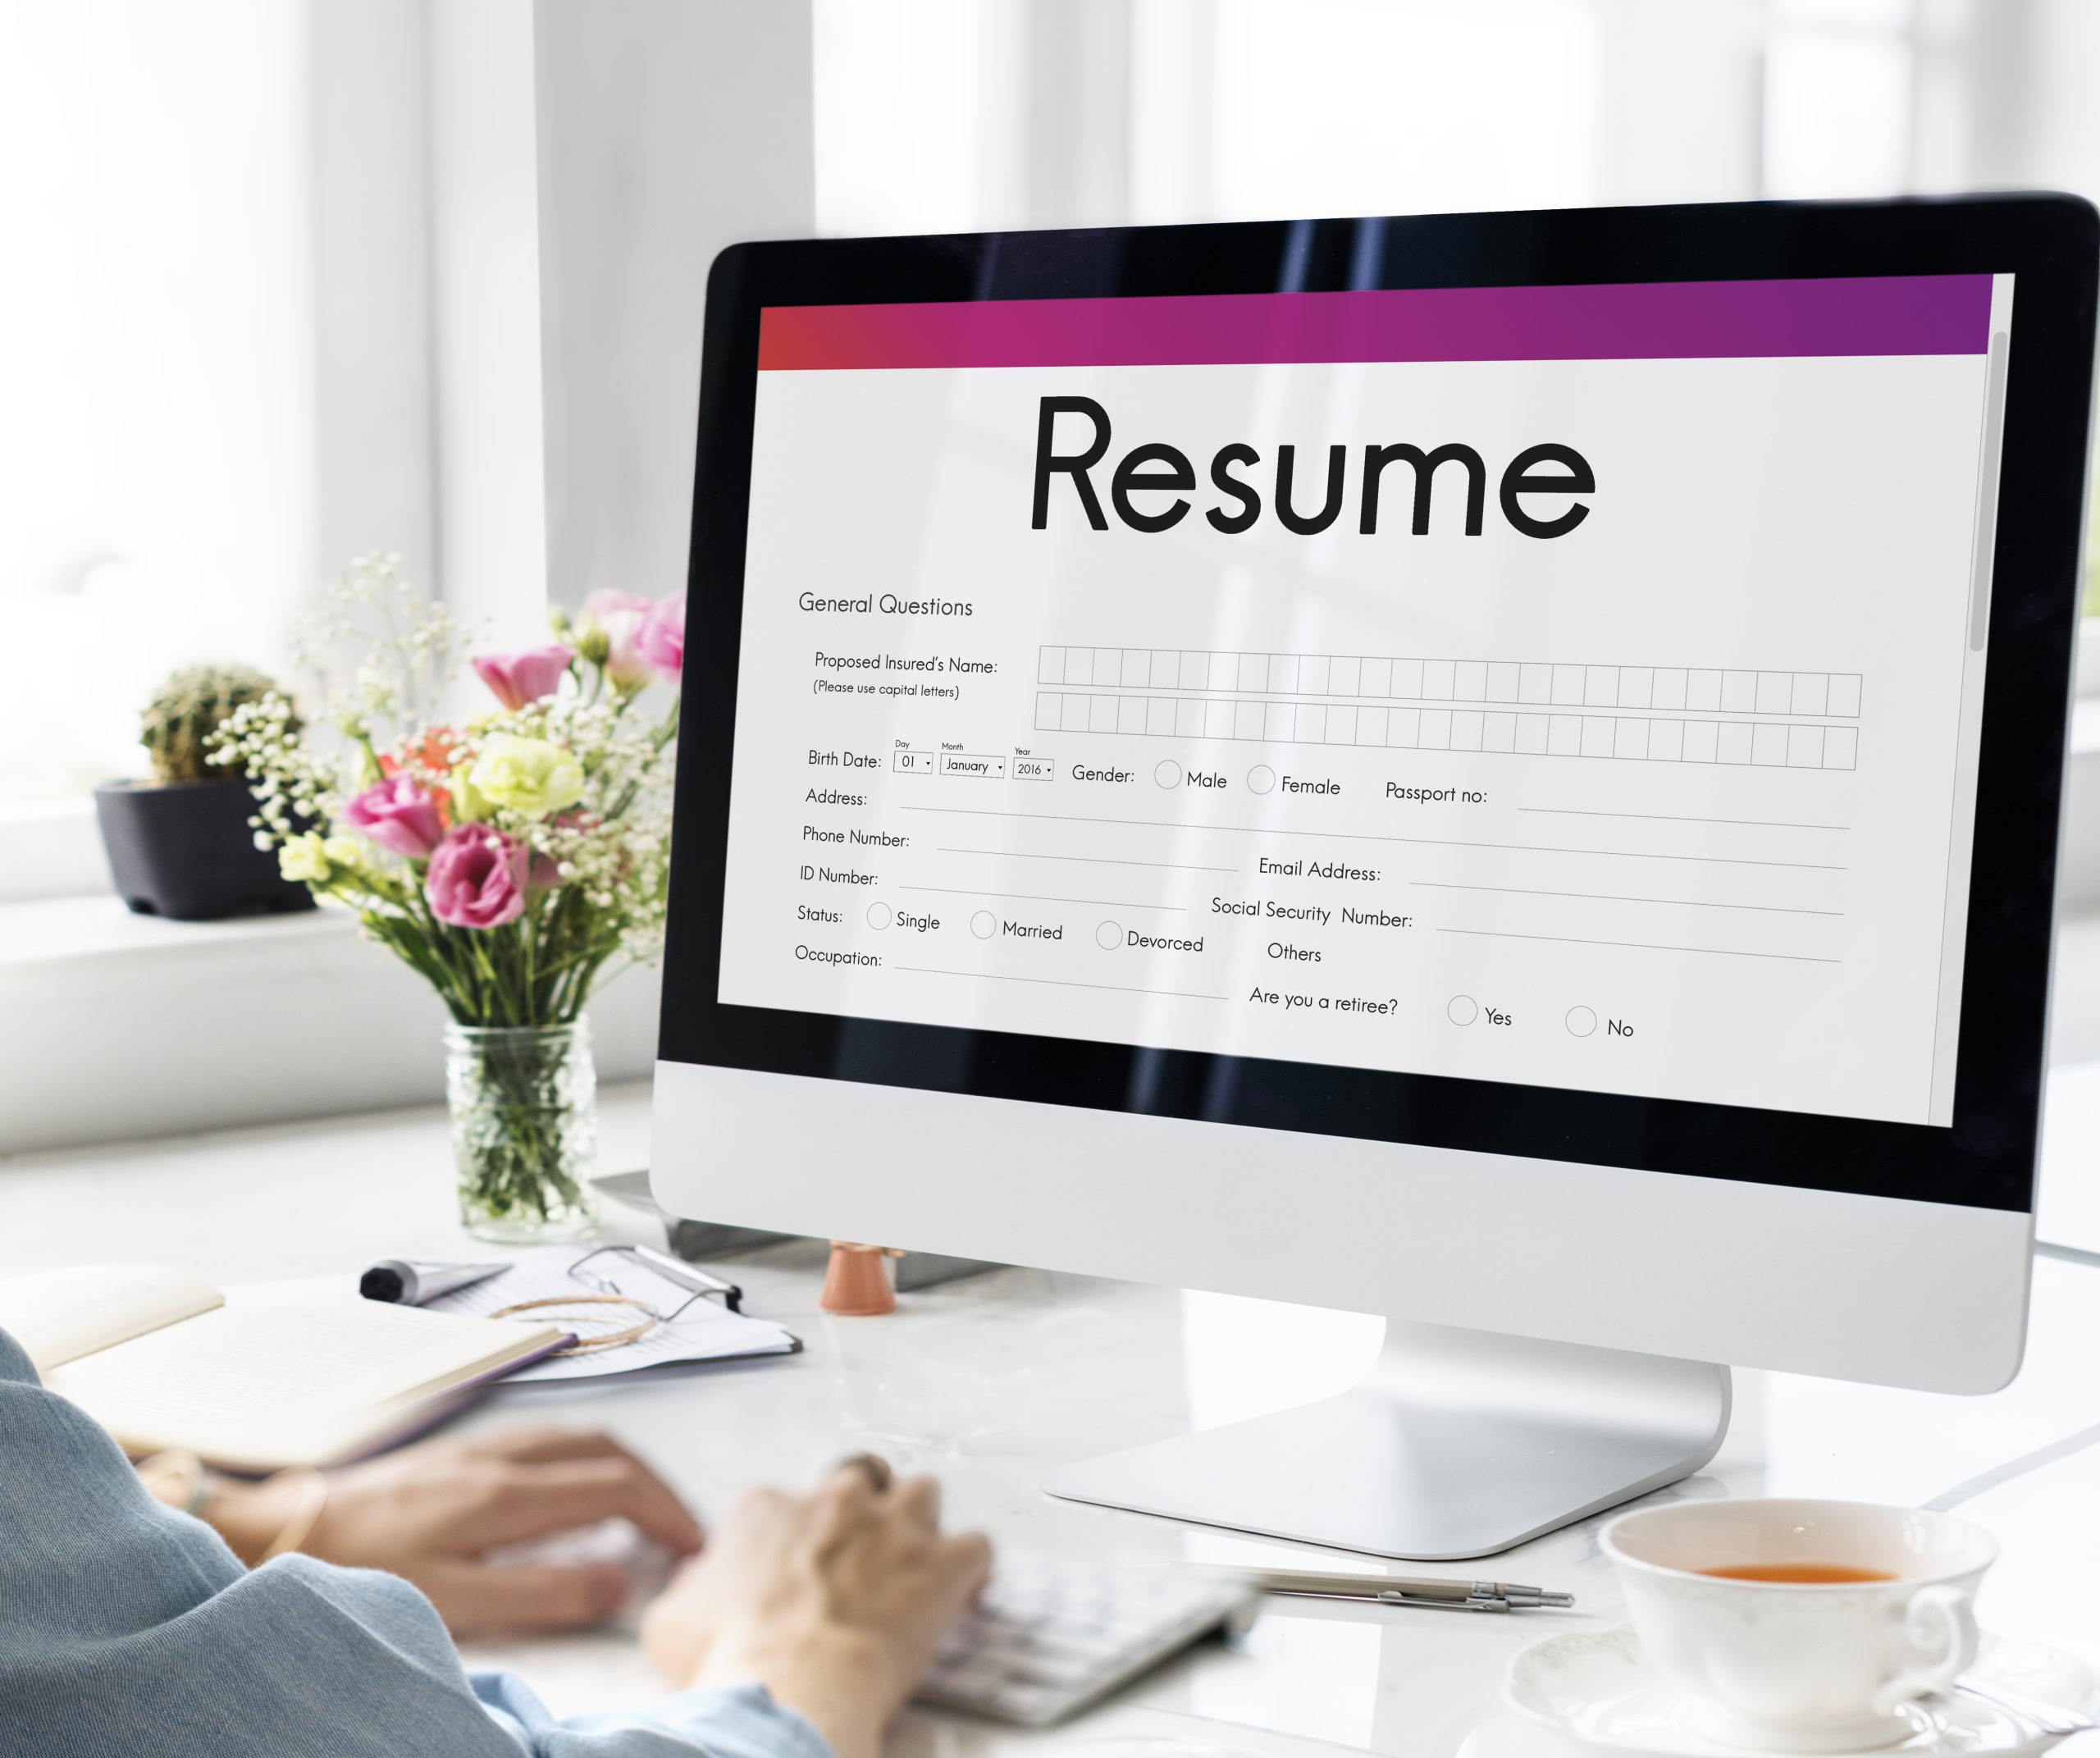 10 Reasons Why It’s Worth Paying for a Resume Writer